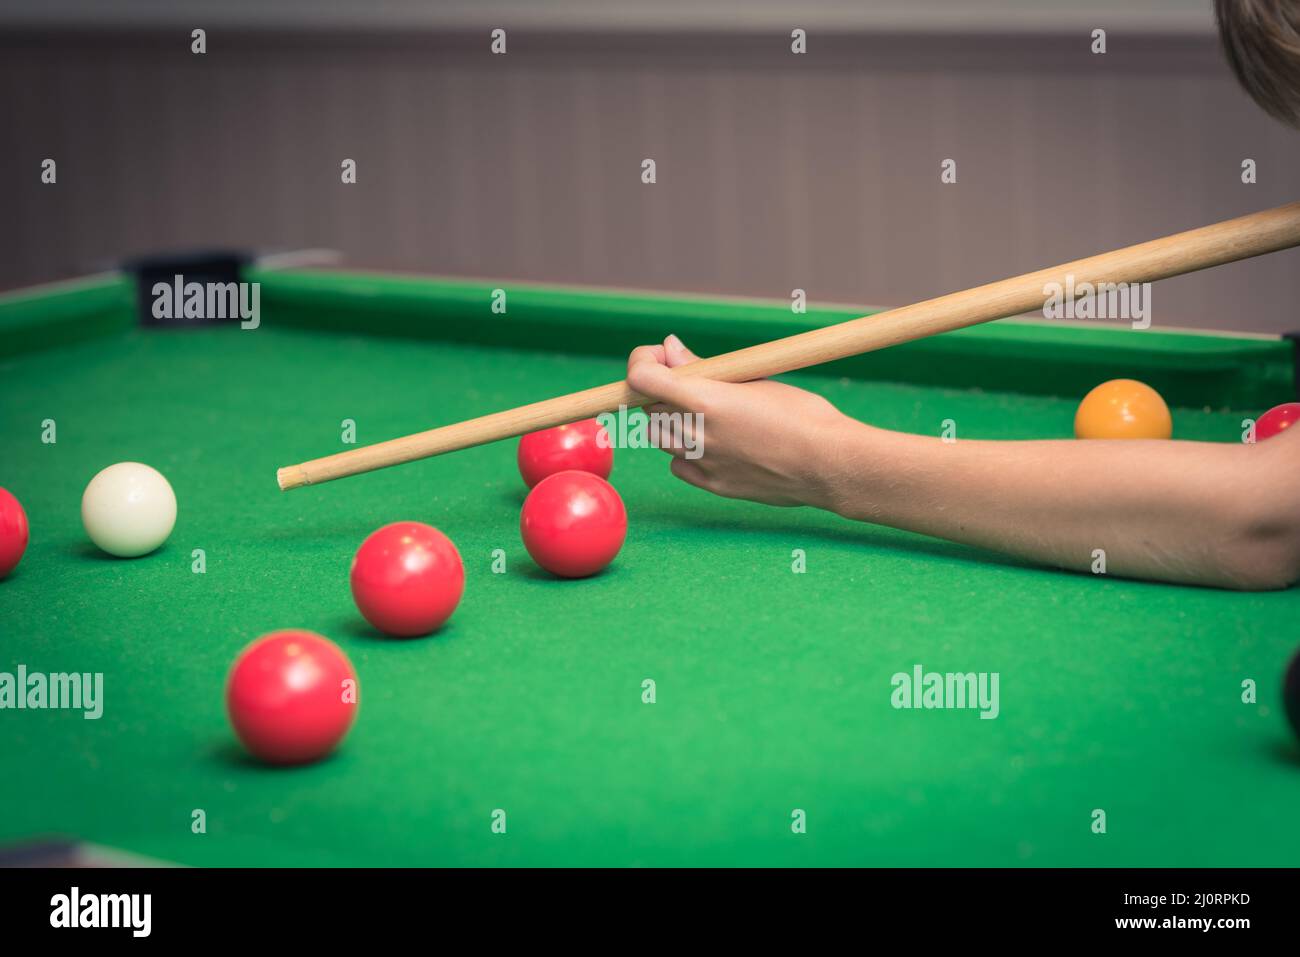 Cute boy in blue t shirt plays billiard or pool in club. Boy with billiard cue strikes the ball on table. Active Leisure, sport, hobby concept Stock Photo